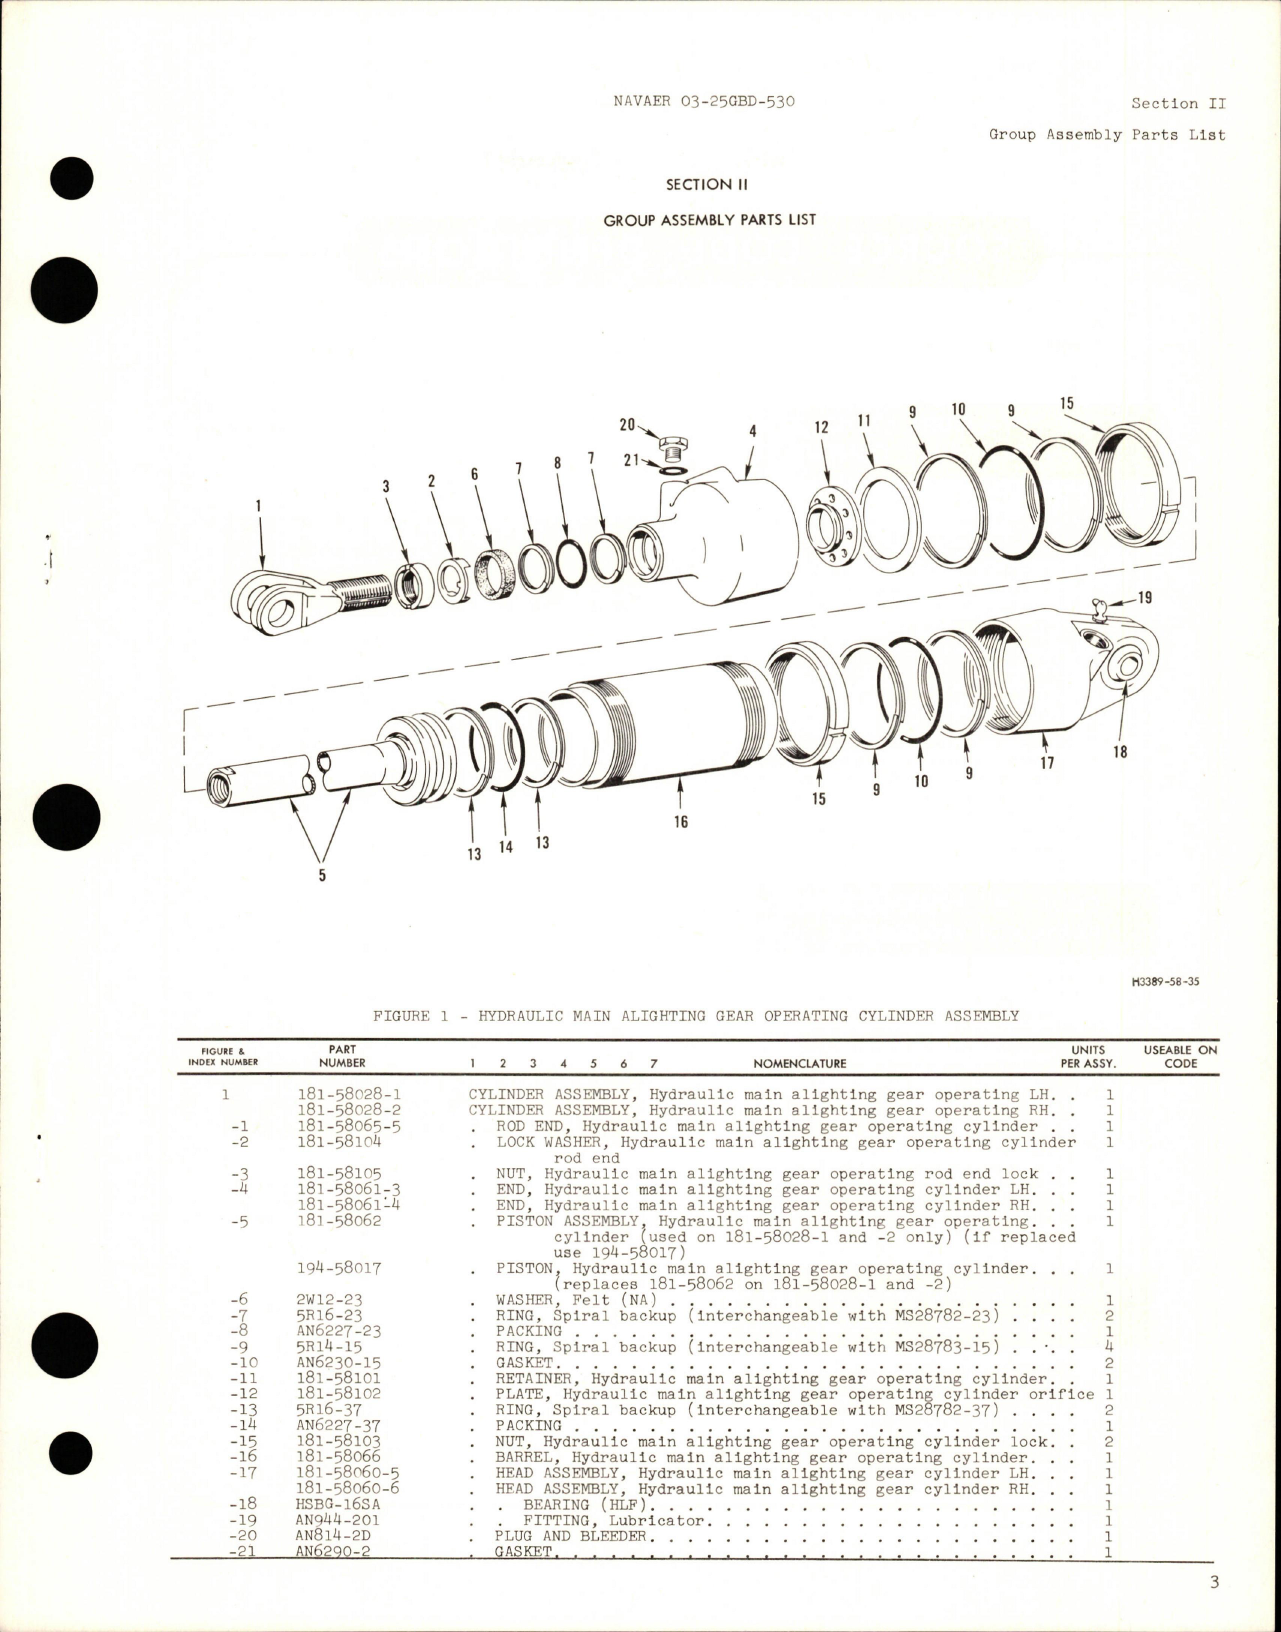 Sample page 5 from AirCorps Library document: Illustrated Parts Breakdown for Hydraulic Main Alighting Gear Operating Assembly - Parts 181-58028-1 and 181-58028-2 